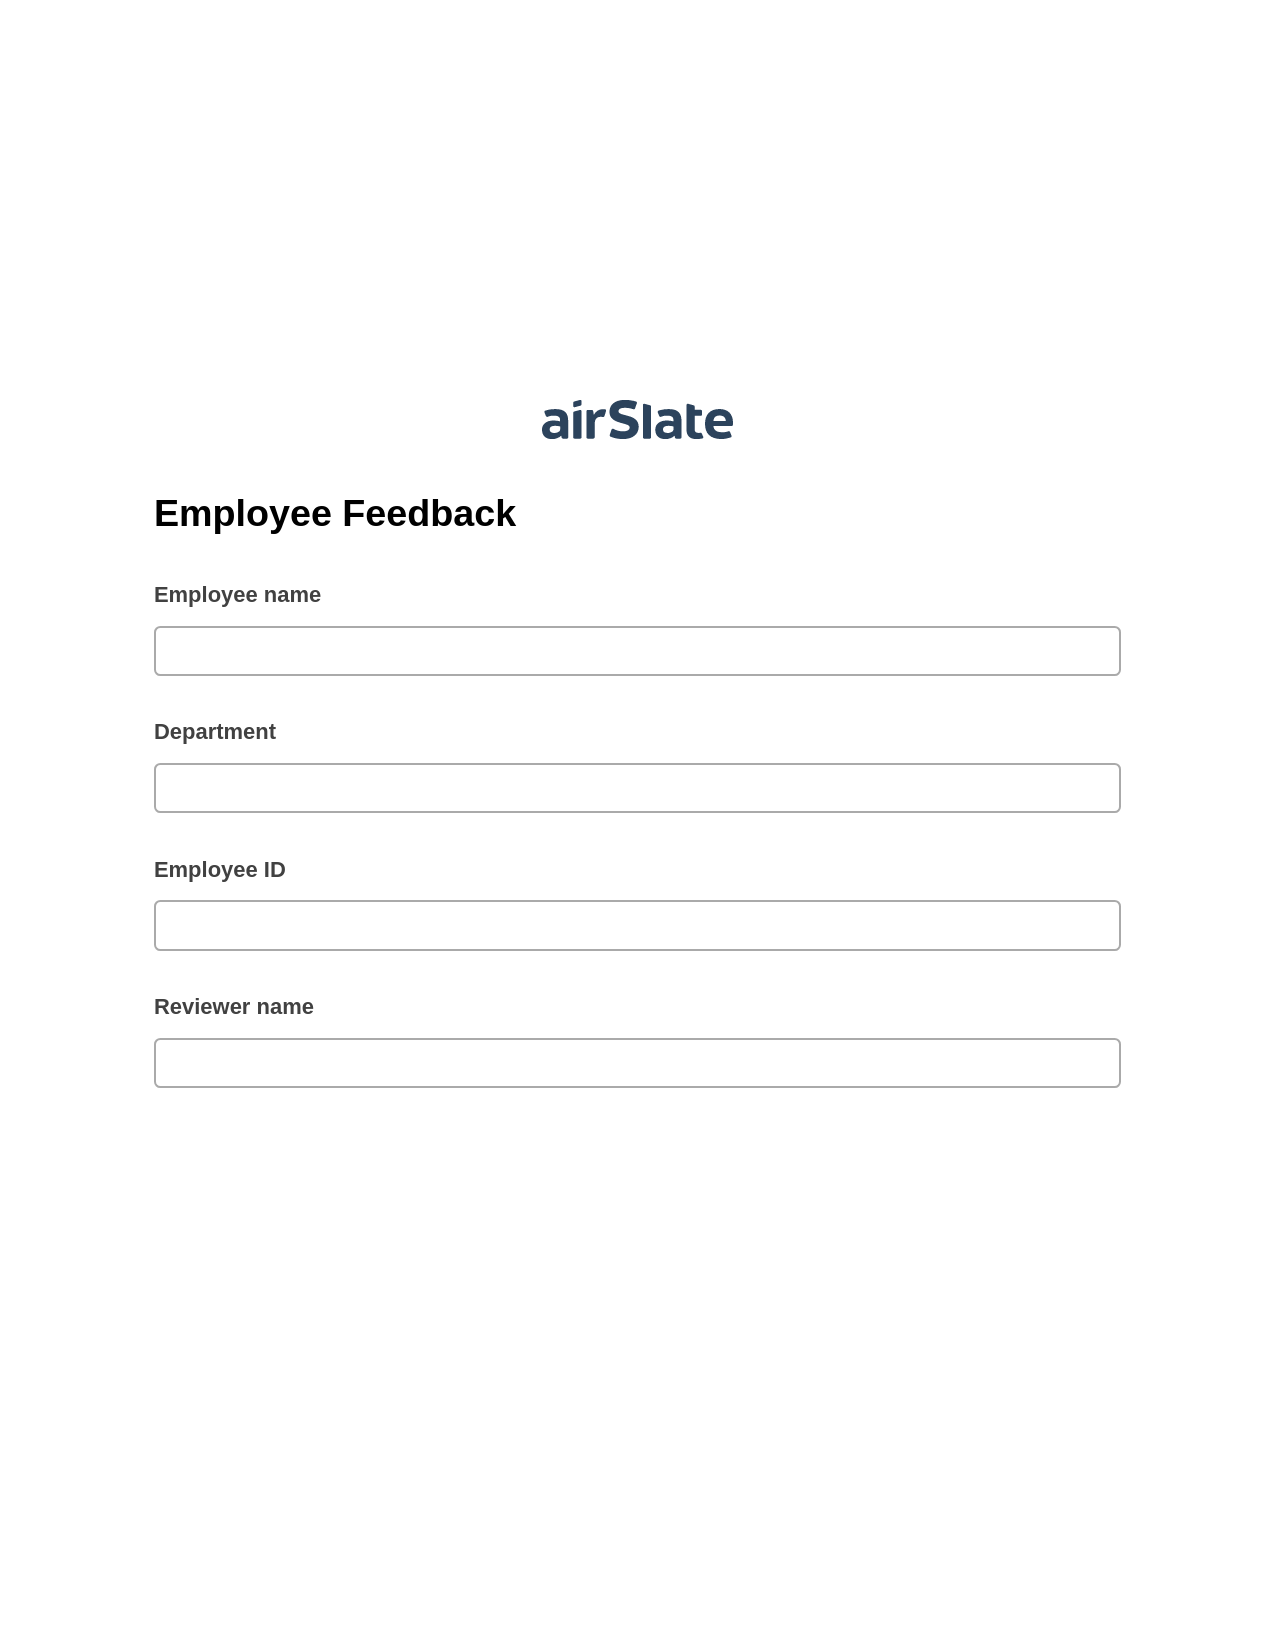 Employee Feedback Pre-fill from NetSuite Records Bot, Webhook Bot, Post-finish Document Bot